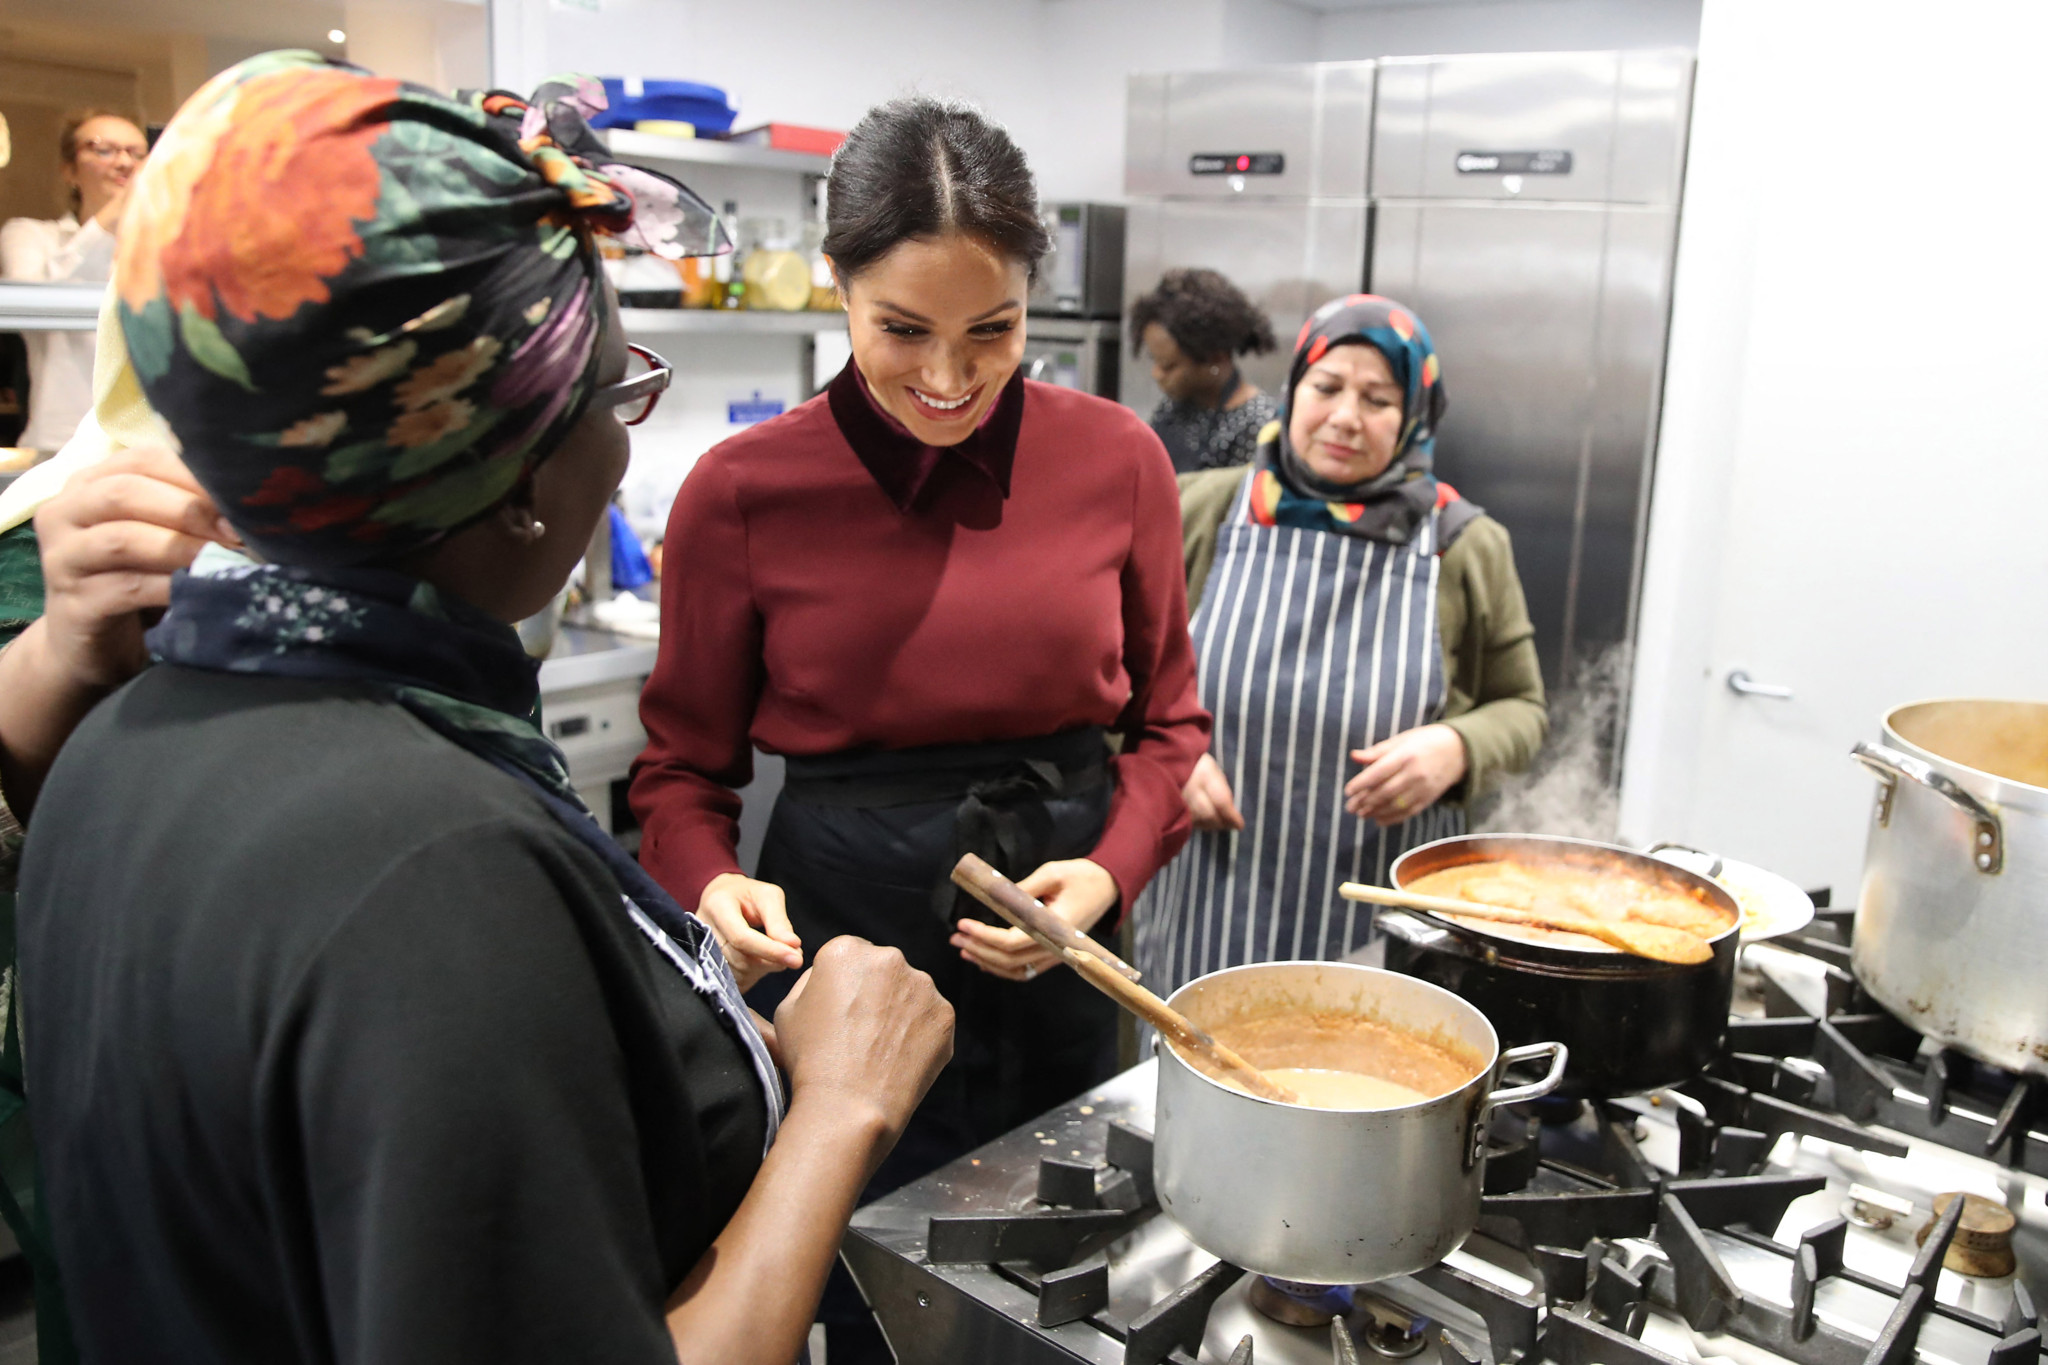 Meghan, Duchess of Sussex (C) visits the Hubb Community Kitchen in London on November 21, 2018 to celebrate the success of their cookbook. The kitchen was set up by women affected by the Grenfell tower fire and Meghan, Duchess of Sussex wrote a foreword to the cookbook to help raise funds for the victims. (Photo by Chris Jackson / POOL / AFP)